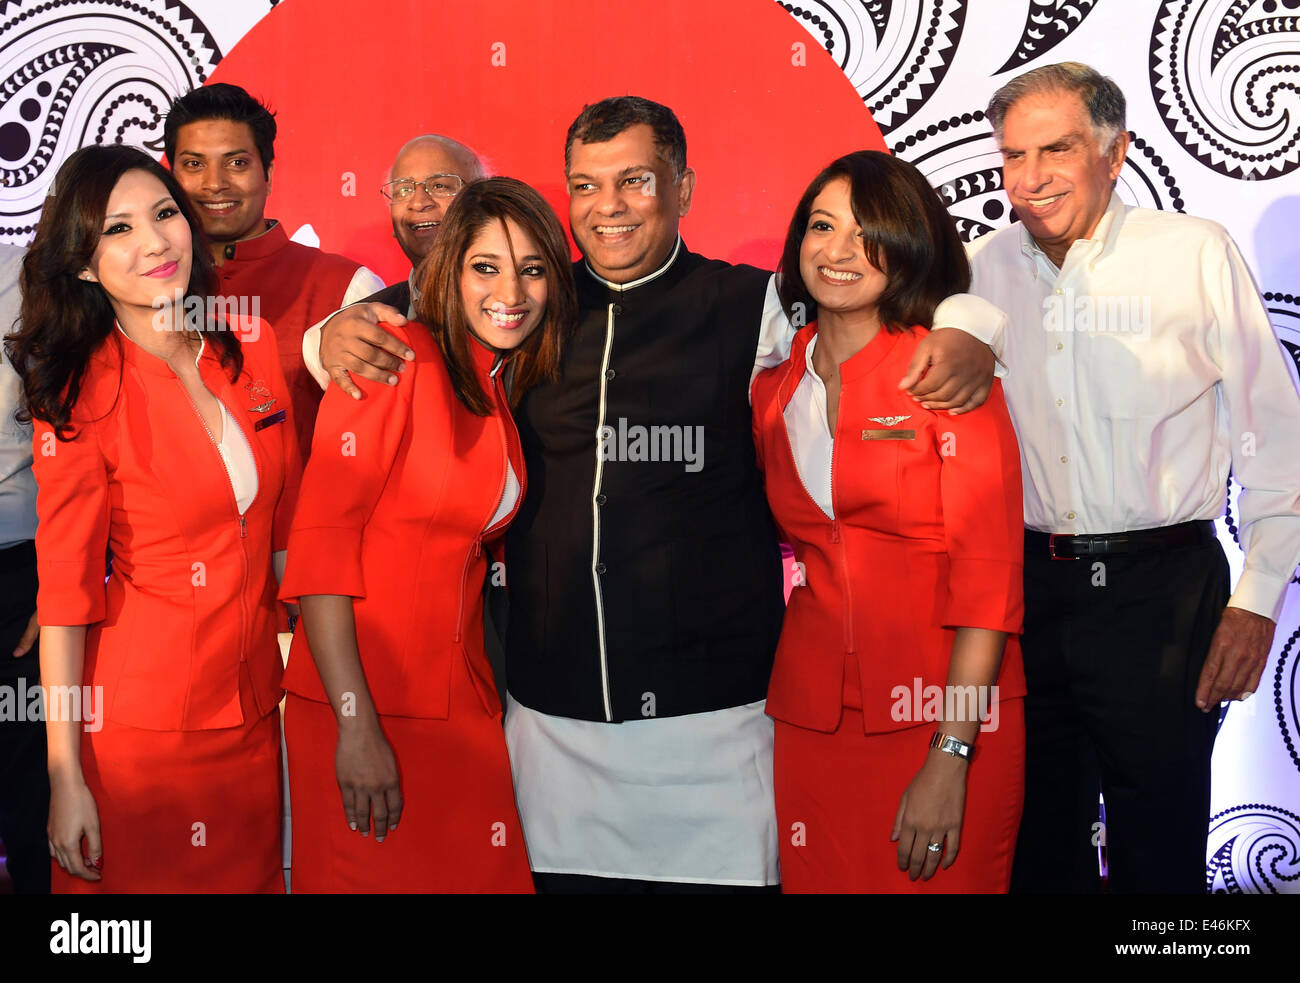 Bangalore, India. 3rd July, 2014. AirAsia's Chief Executive Officer Tony Fernandes (C) and Chairman Emeritus of India's Tata Sons Ltd Ratan Tata (1st R) pose with cabin crew during a press conference to celebrate the launch of Air Asia India in Bangalore, India, July 3, 2014. Credit:  Stringer/Xinhua/Alamy Live News Stock Photo